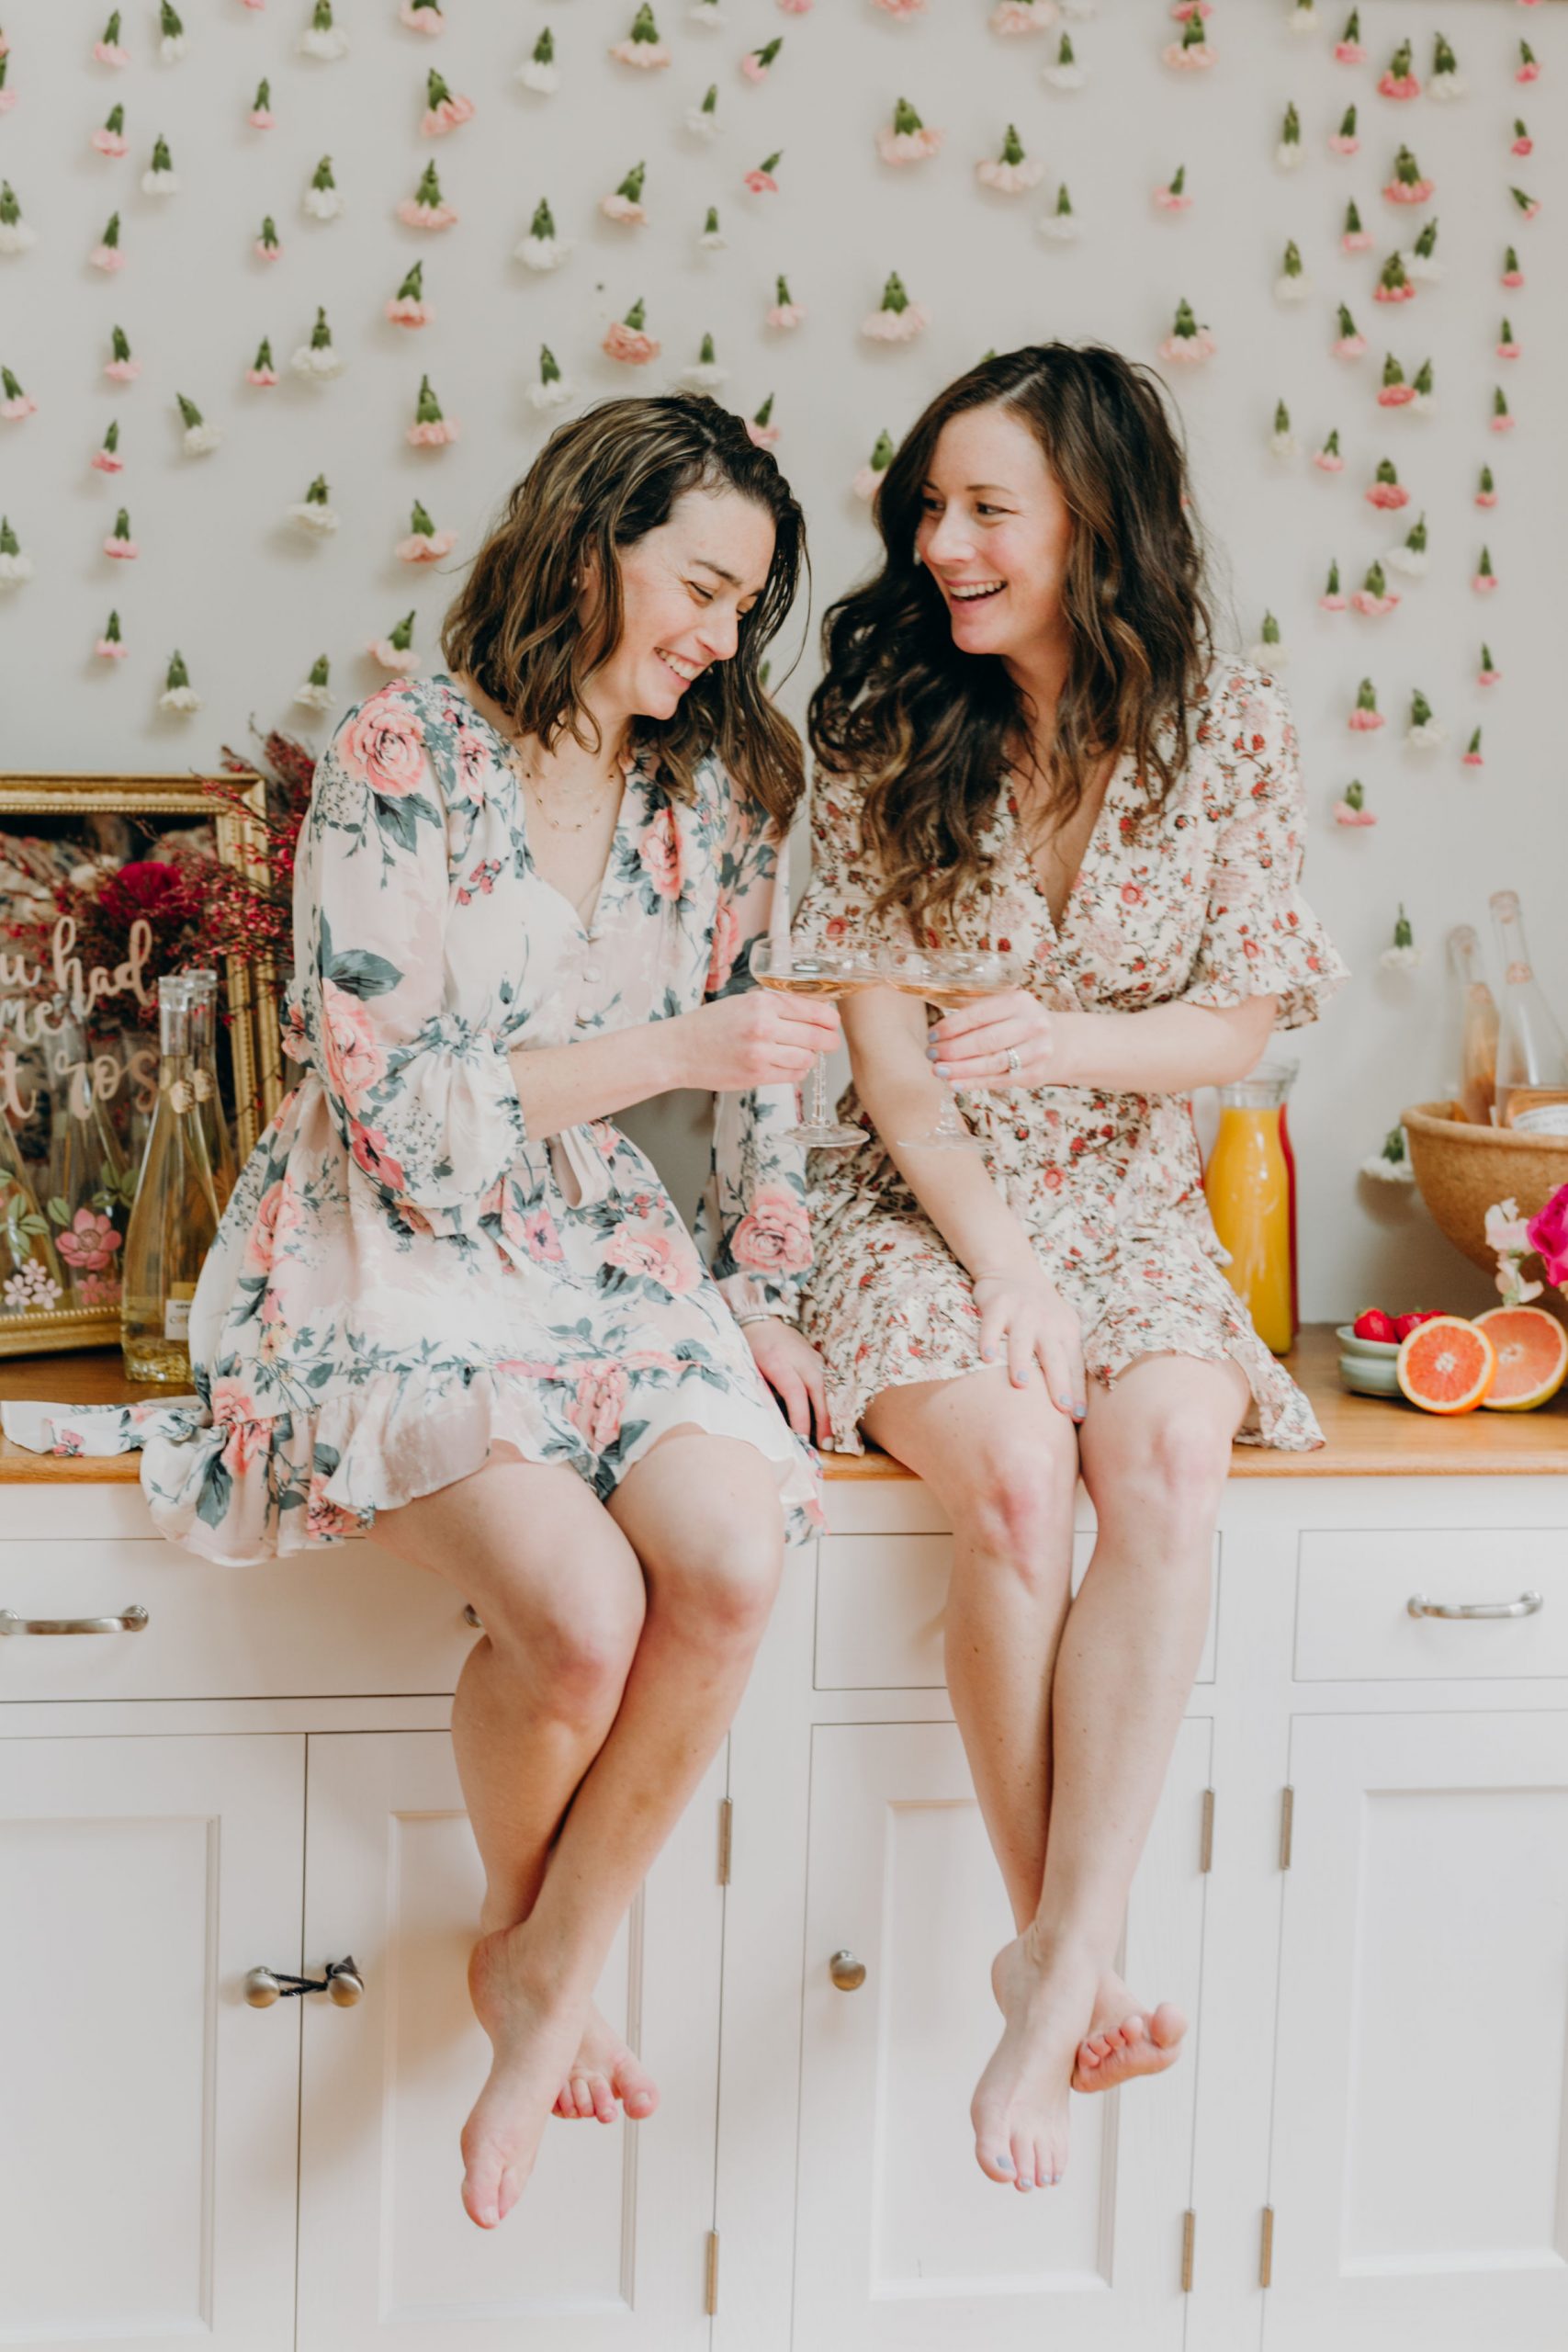 How to Host a Galentine’s Day Brunch